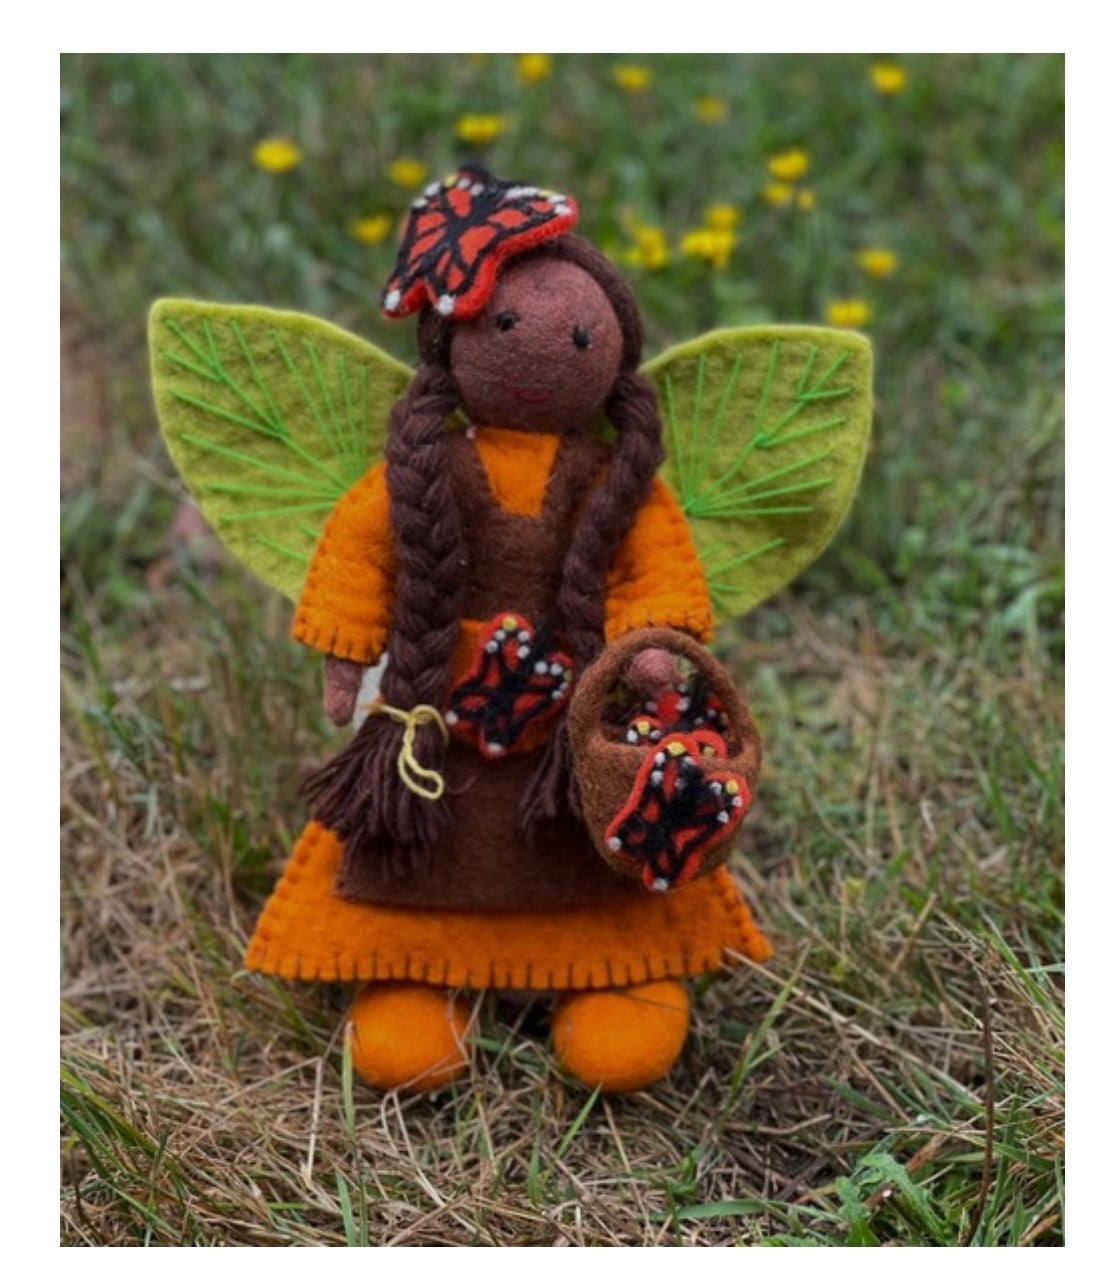 Pari the Butterfly Faery of the Forest